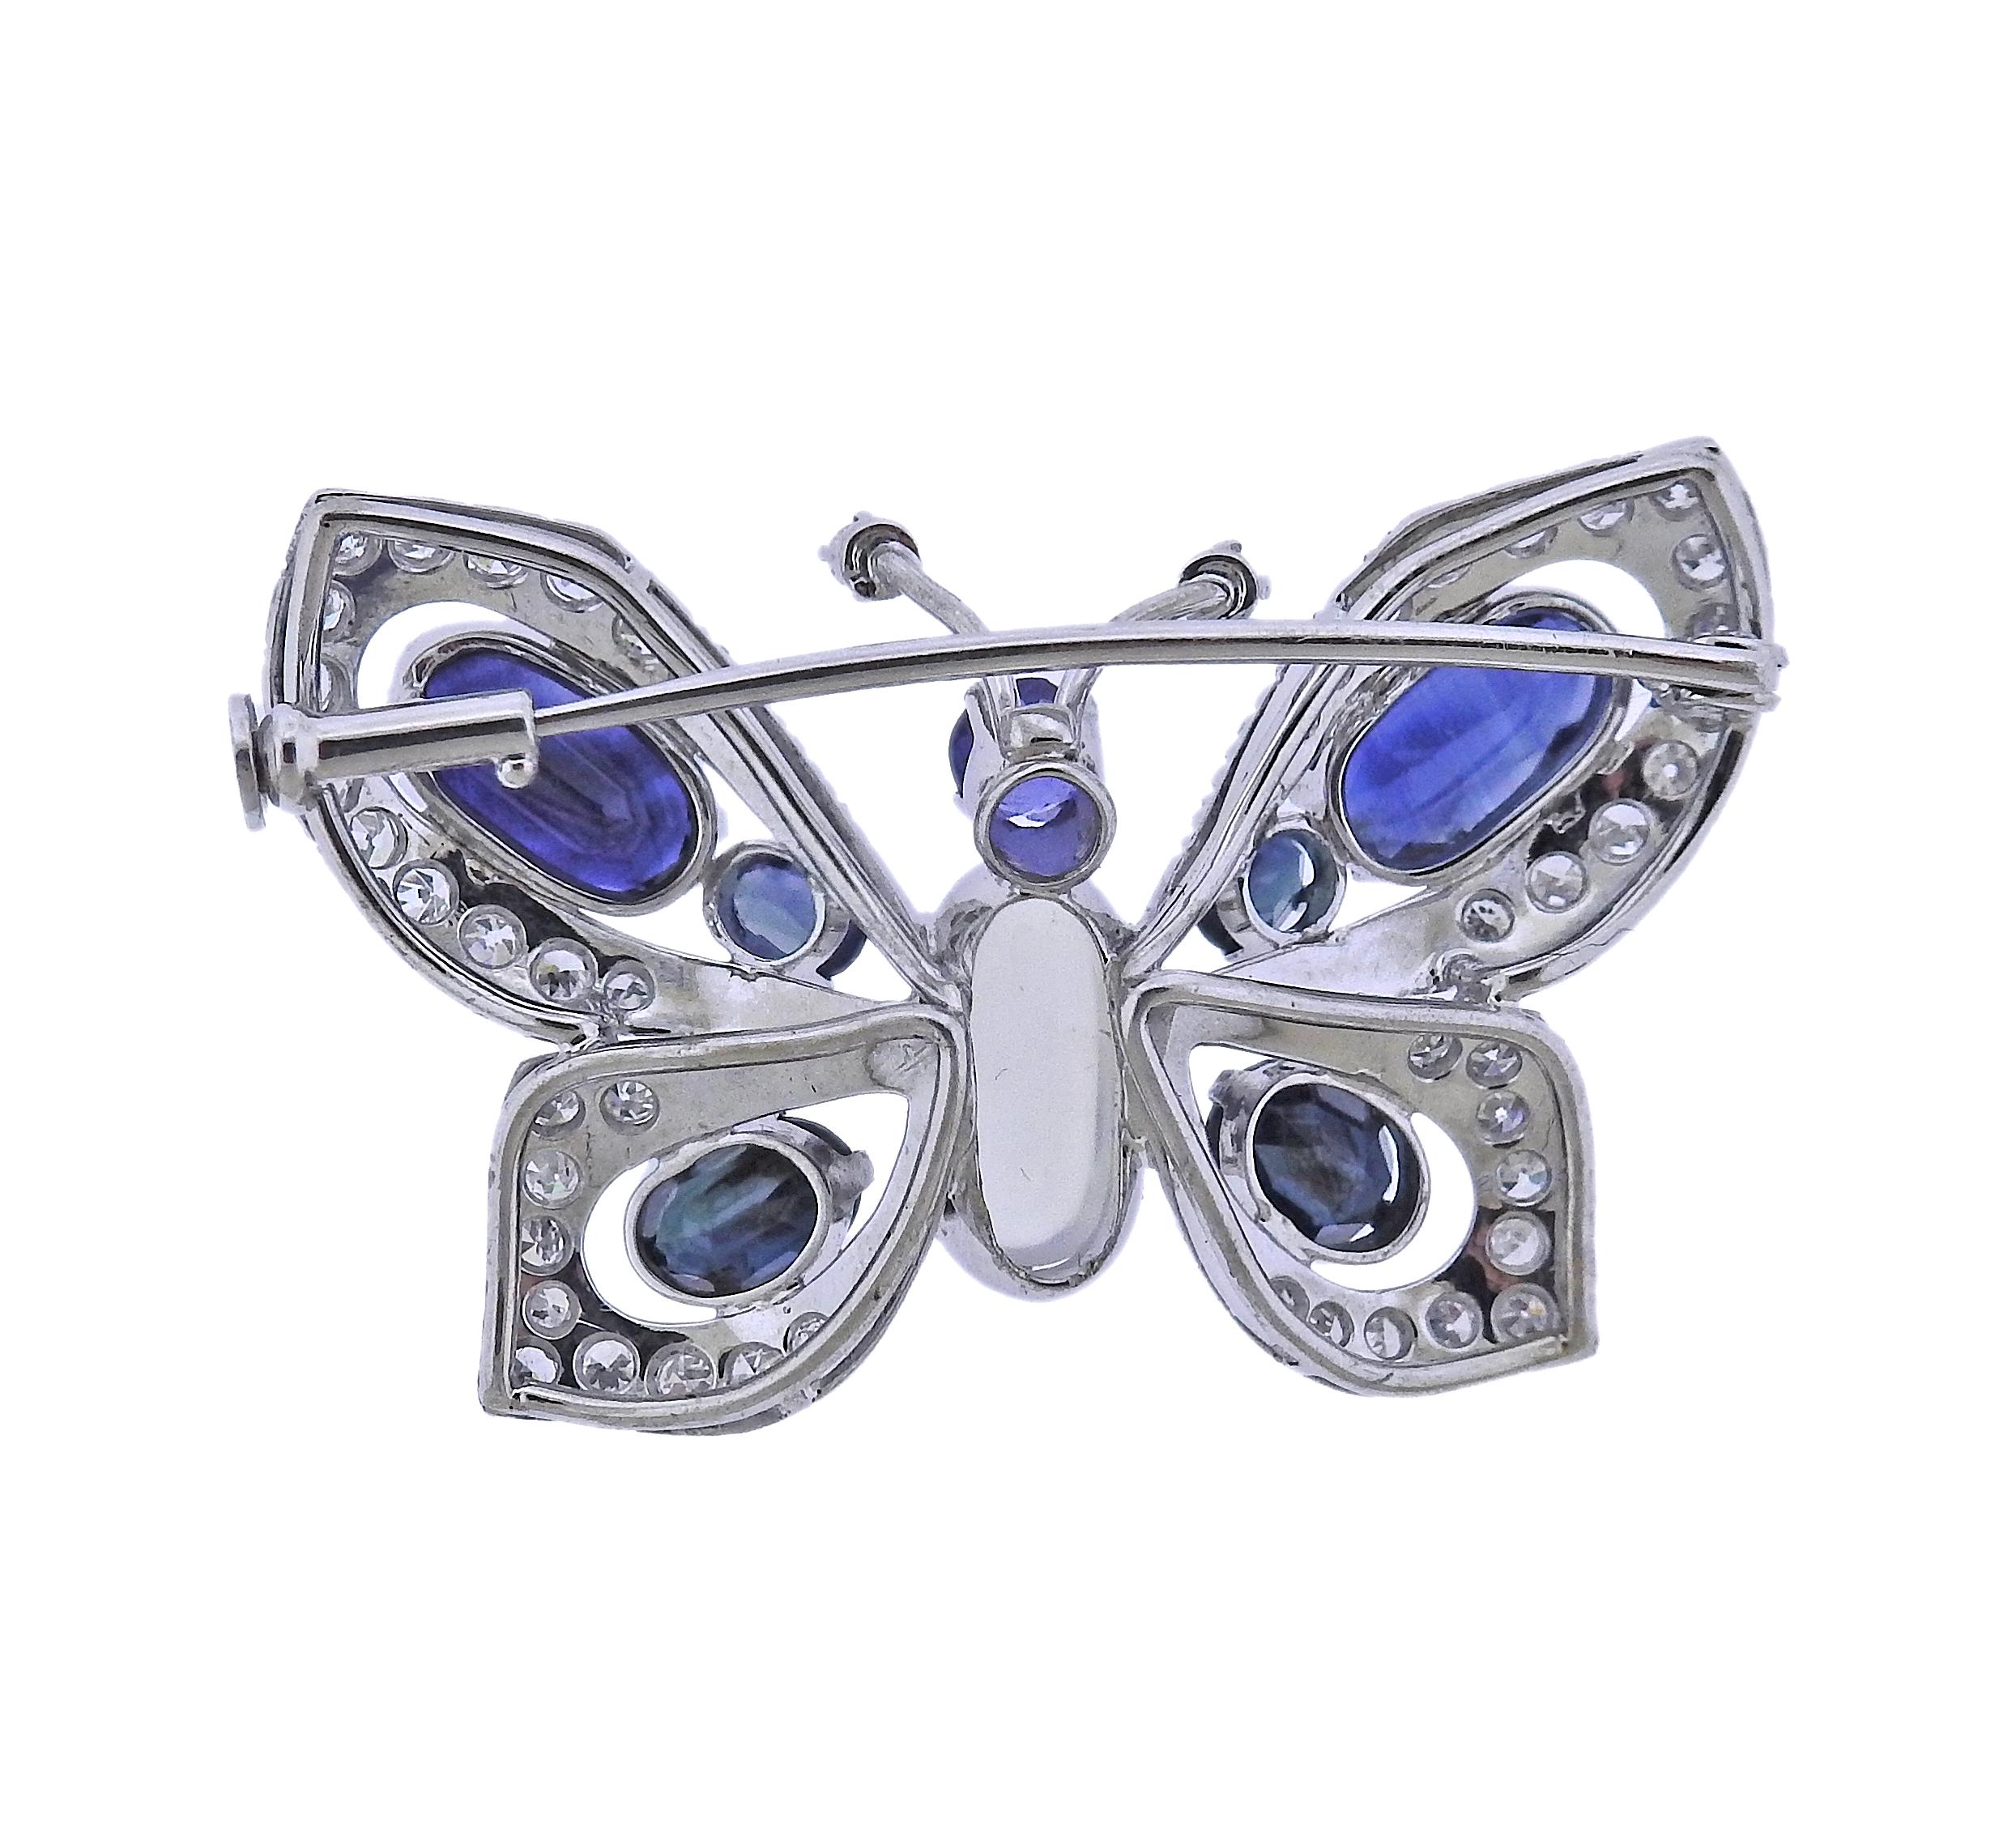 18k gold butterfly brooch, with sapphires, moonstone and approx. 0.52ctw in diamonds. Brooch measures 36mm x 23mm. Weight - 8.1 grams.